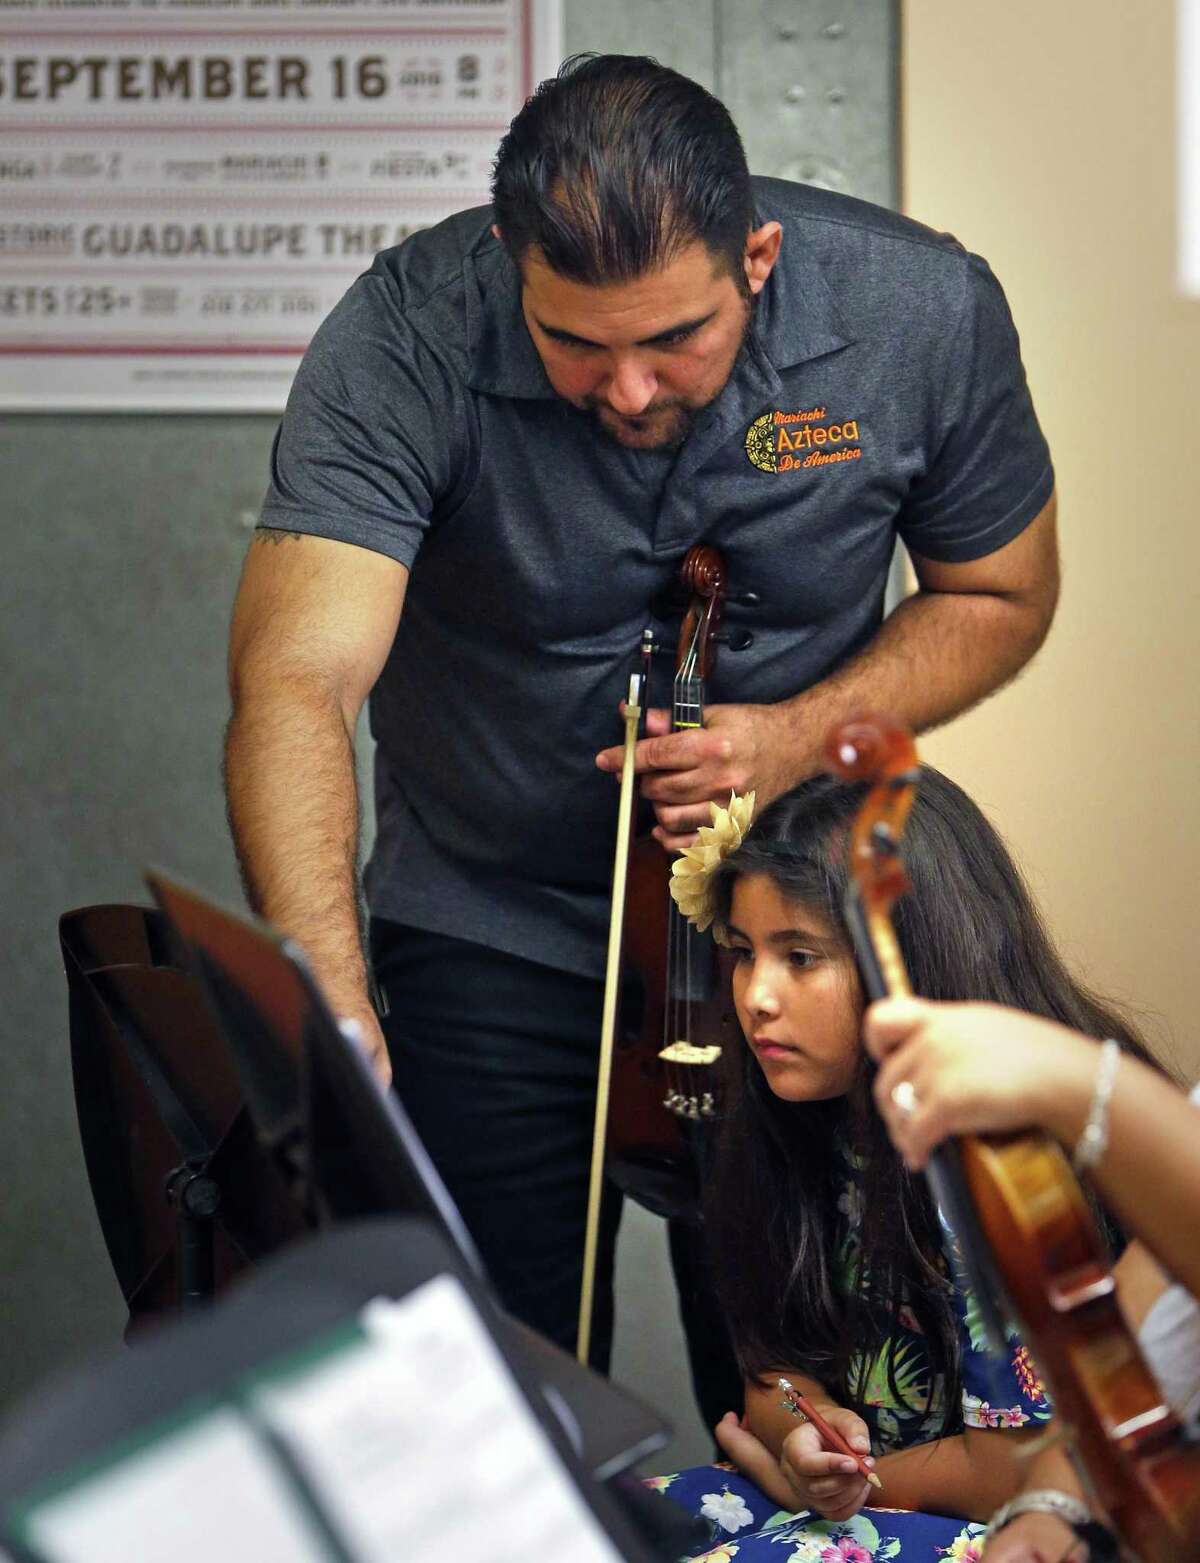 Gumecindo “Gino” Rivera, a violinist who leads and plays with Mariachi Azteca de America, works with 8-year-old Lolita Trujillo, one of the students taking part in mariachi camp at the Guadalupe Cultural Arts Center. Rivera has been named traditional music director at the Guadalupe Academy.